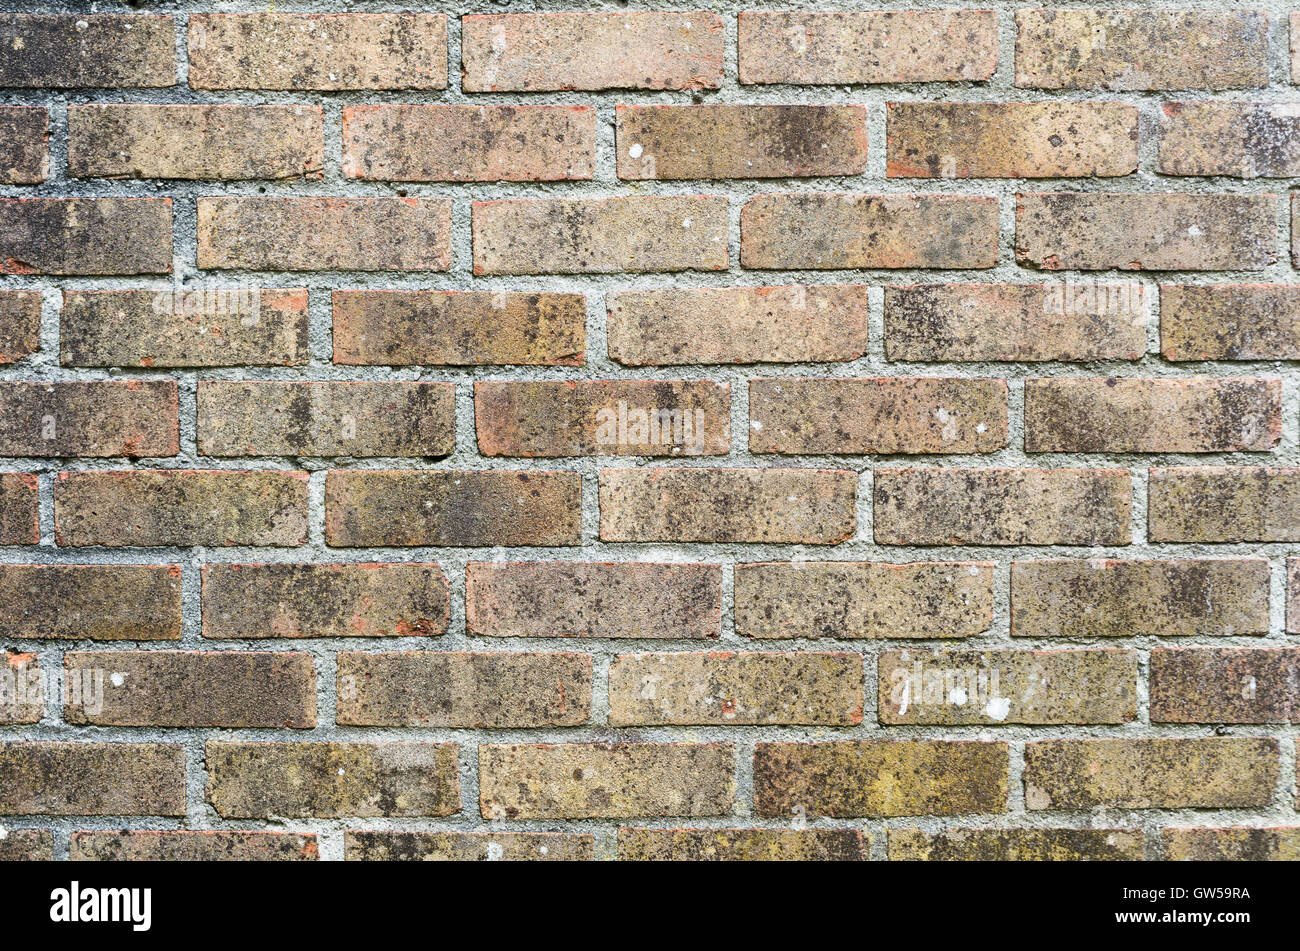 Landscape picture of nothing but a brick wall, with slight discoloration of the brickwork. Stock Photo